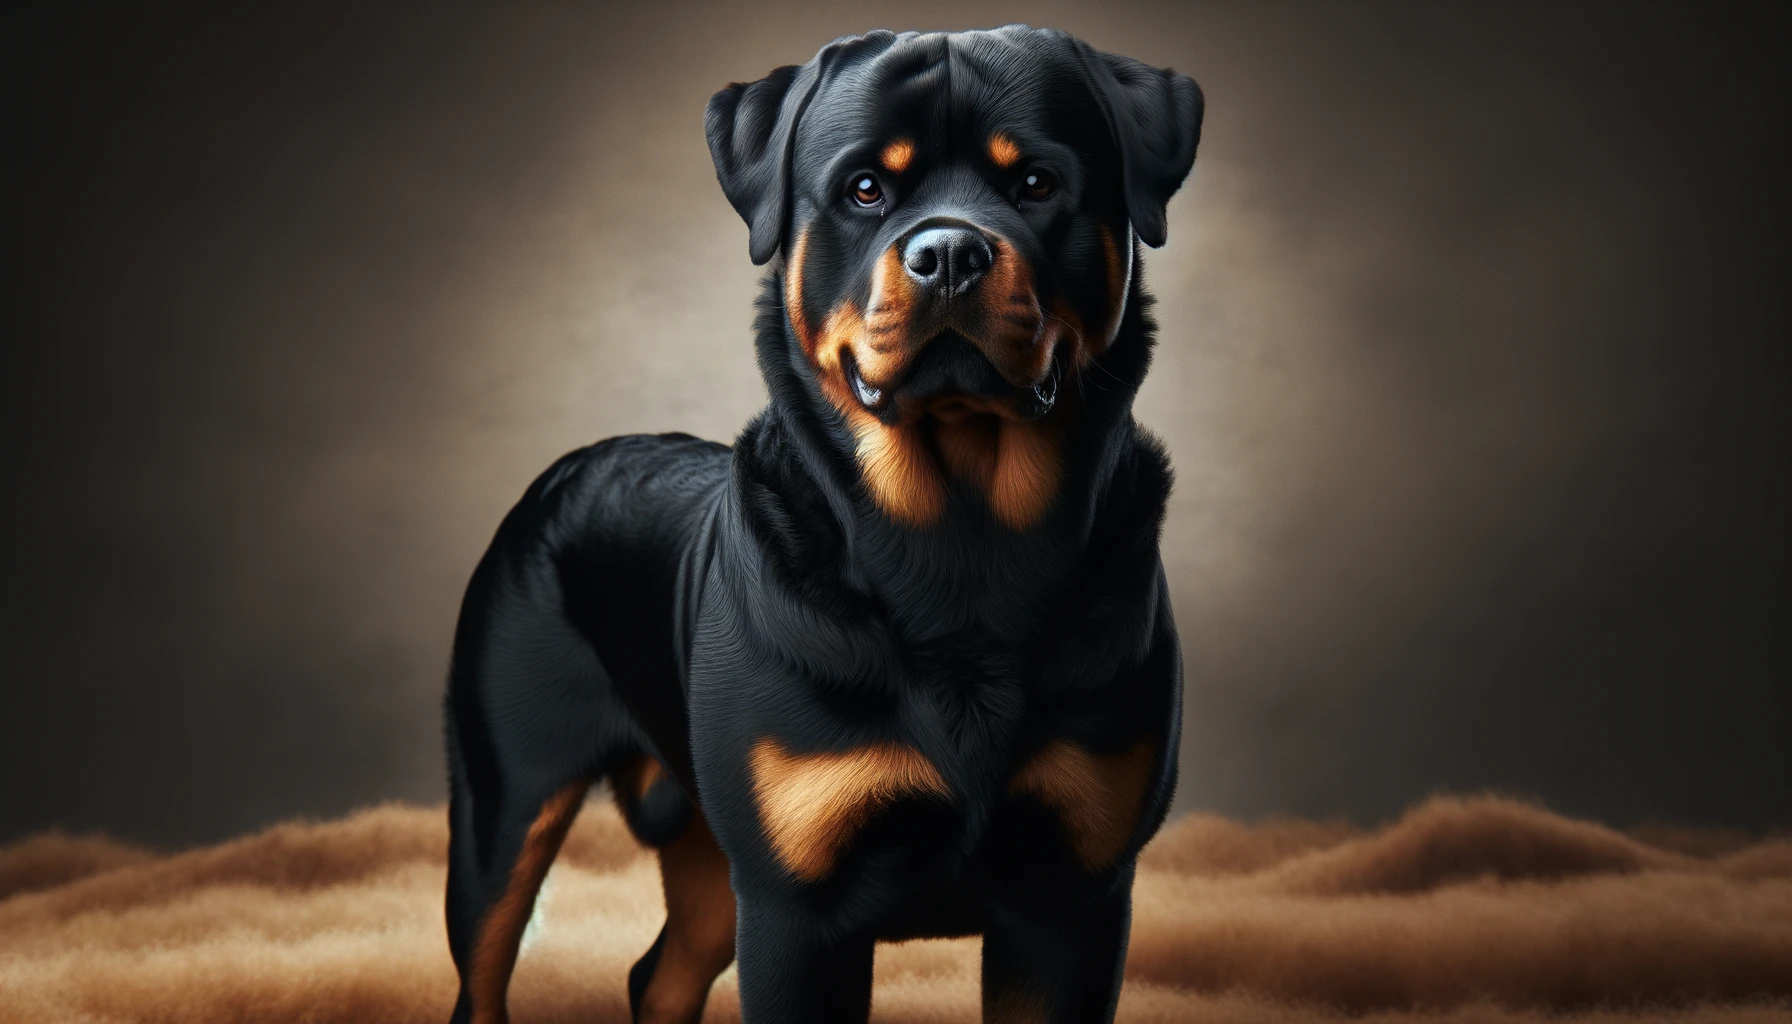 Purebred Rottweiler with Iconic Black and Tan Coat